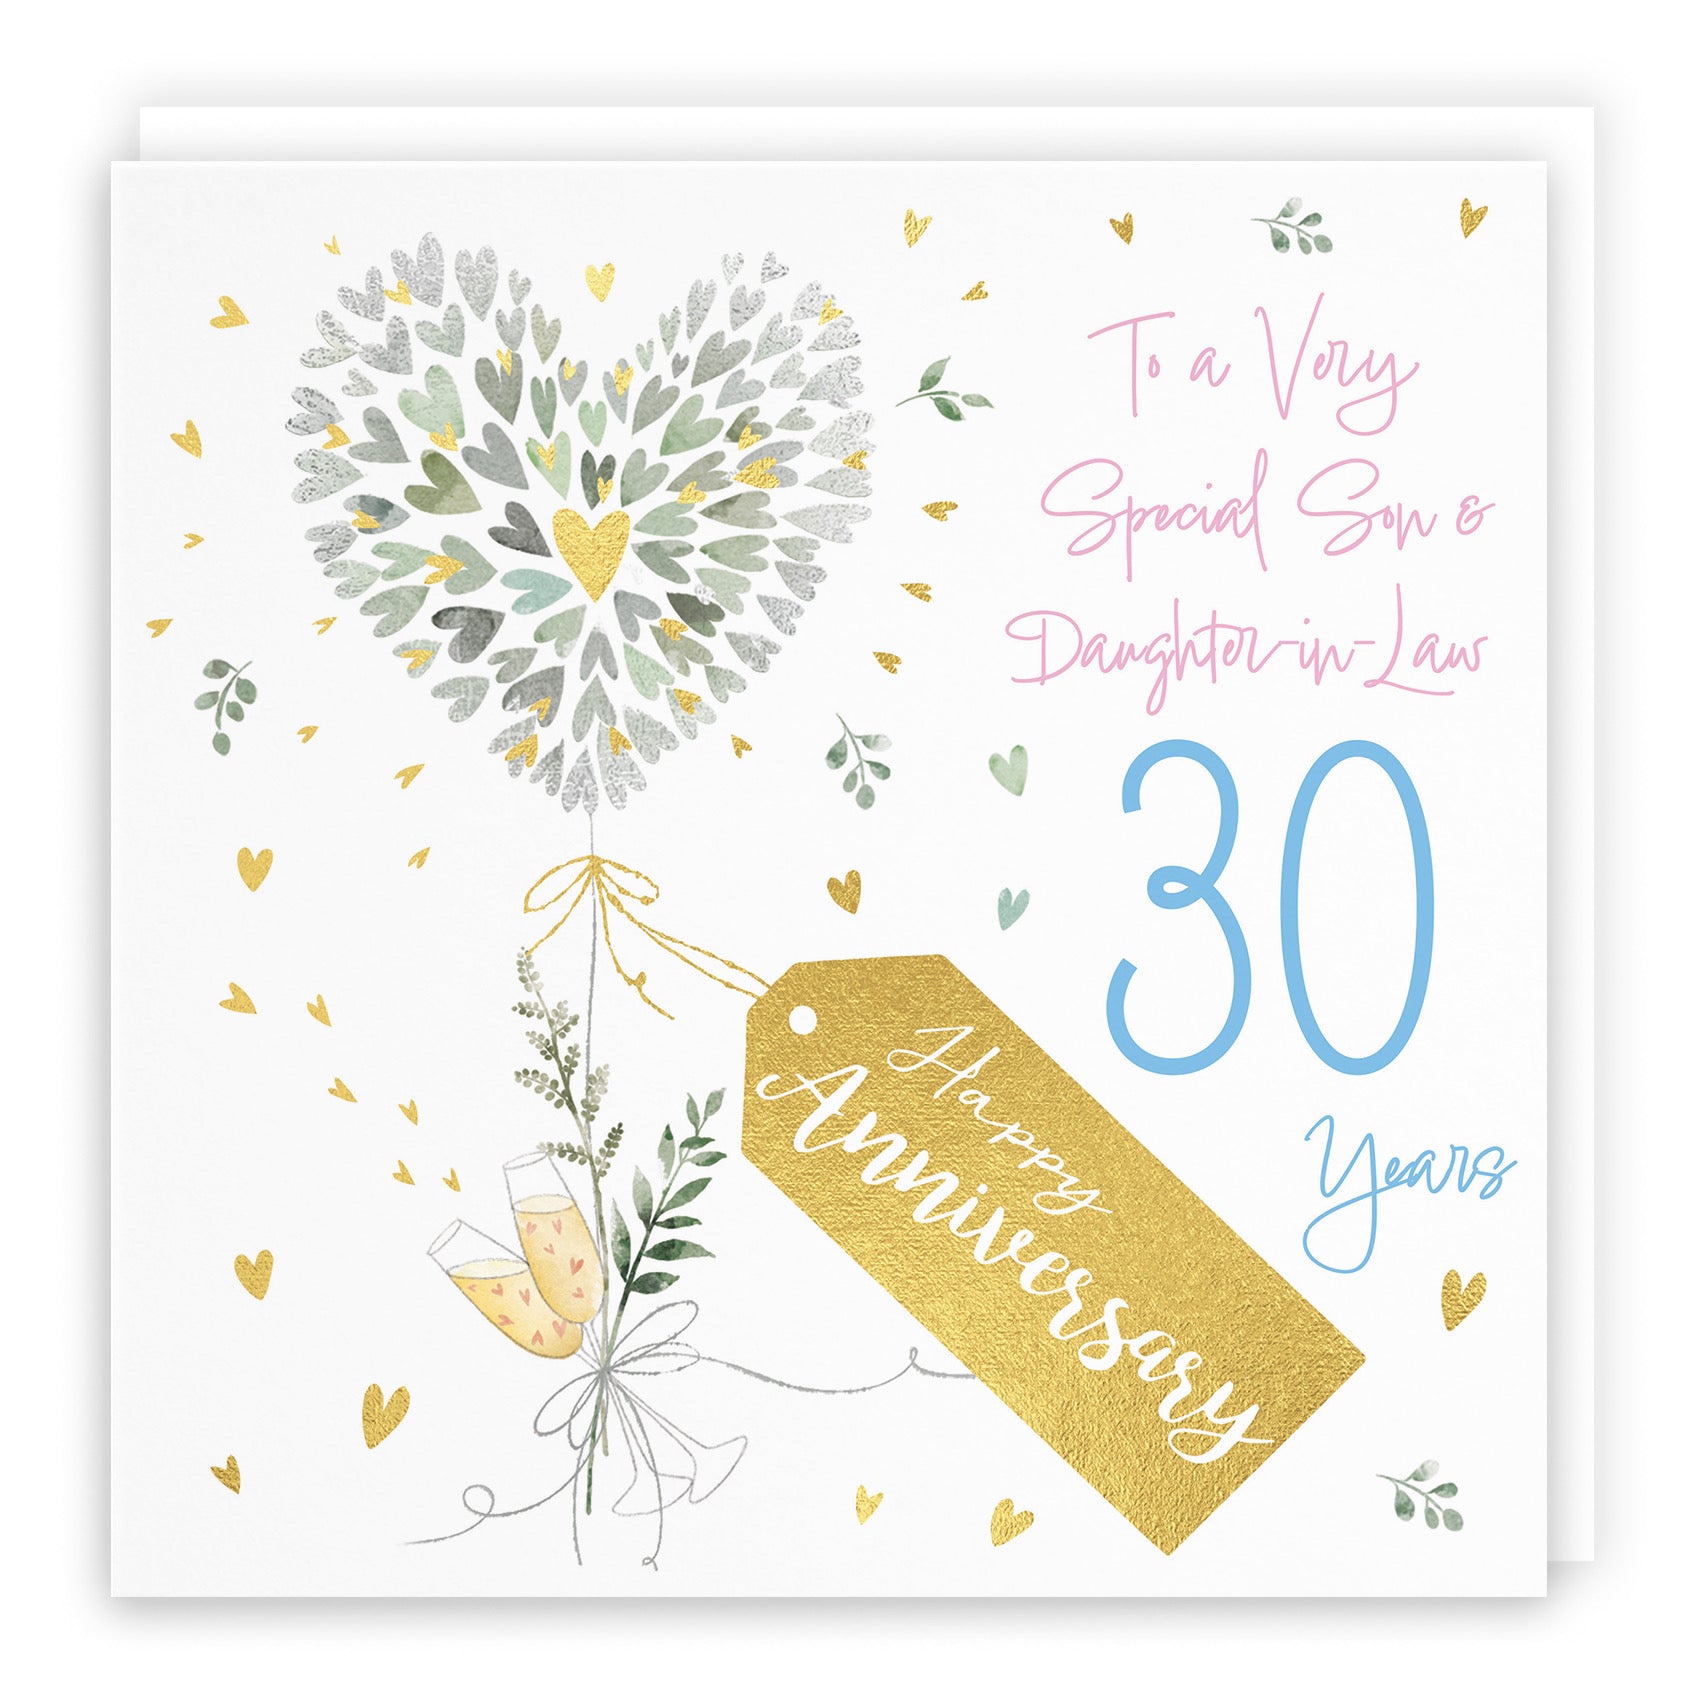 Son And Daughter-in-Law 30th Anniversary Card Contemporary Hearts Milo's Gallery - Default Title (B0CKJ598LG)